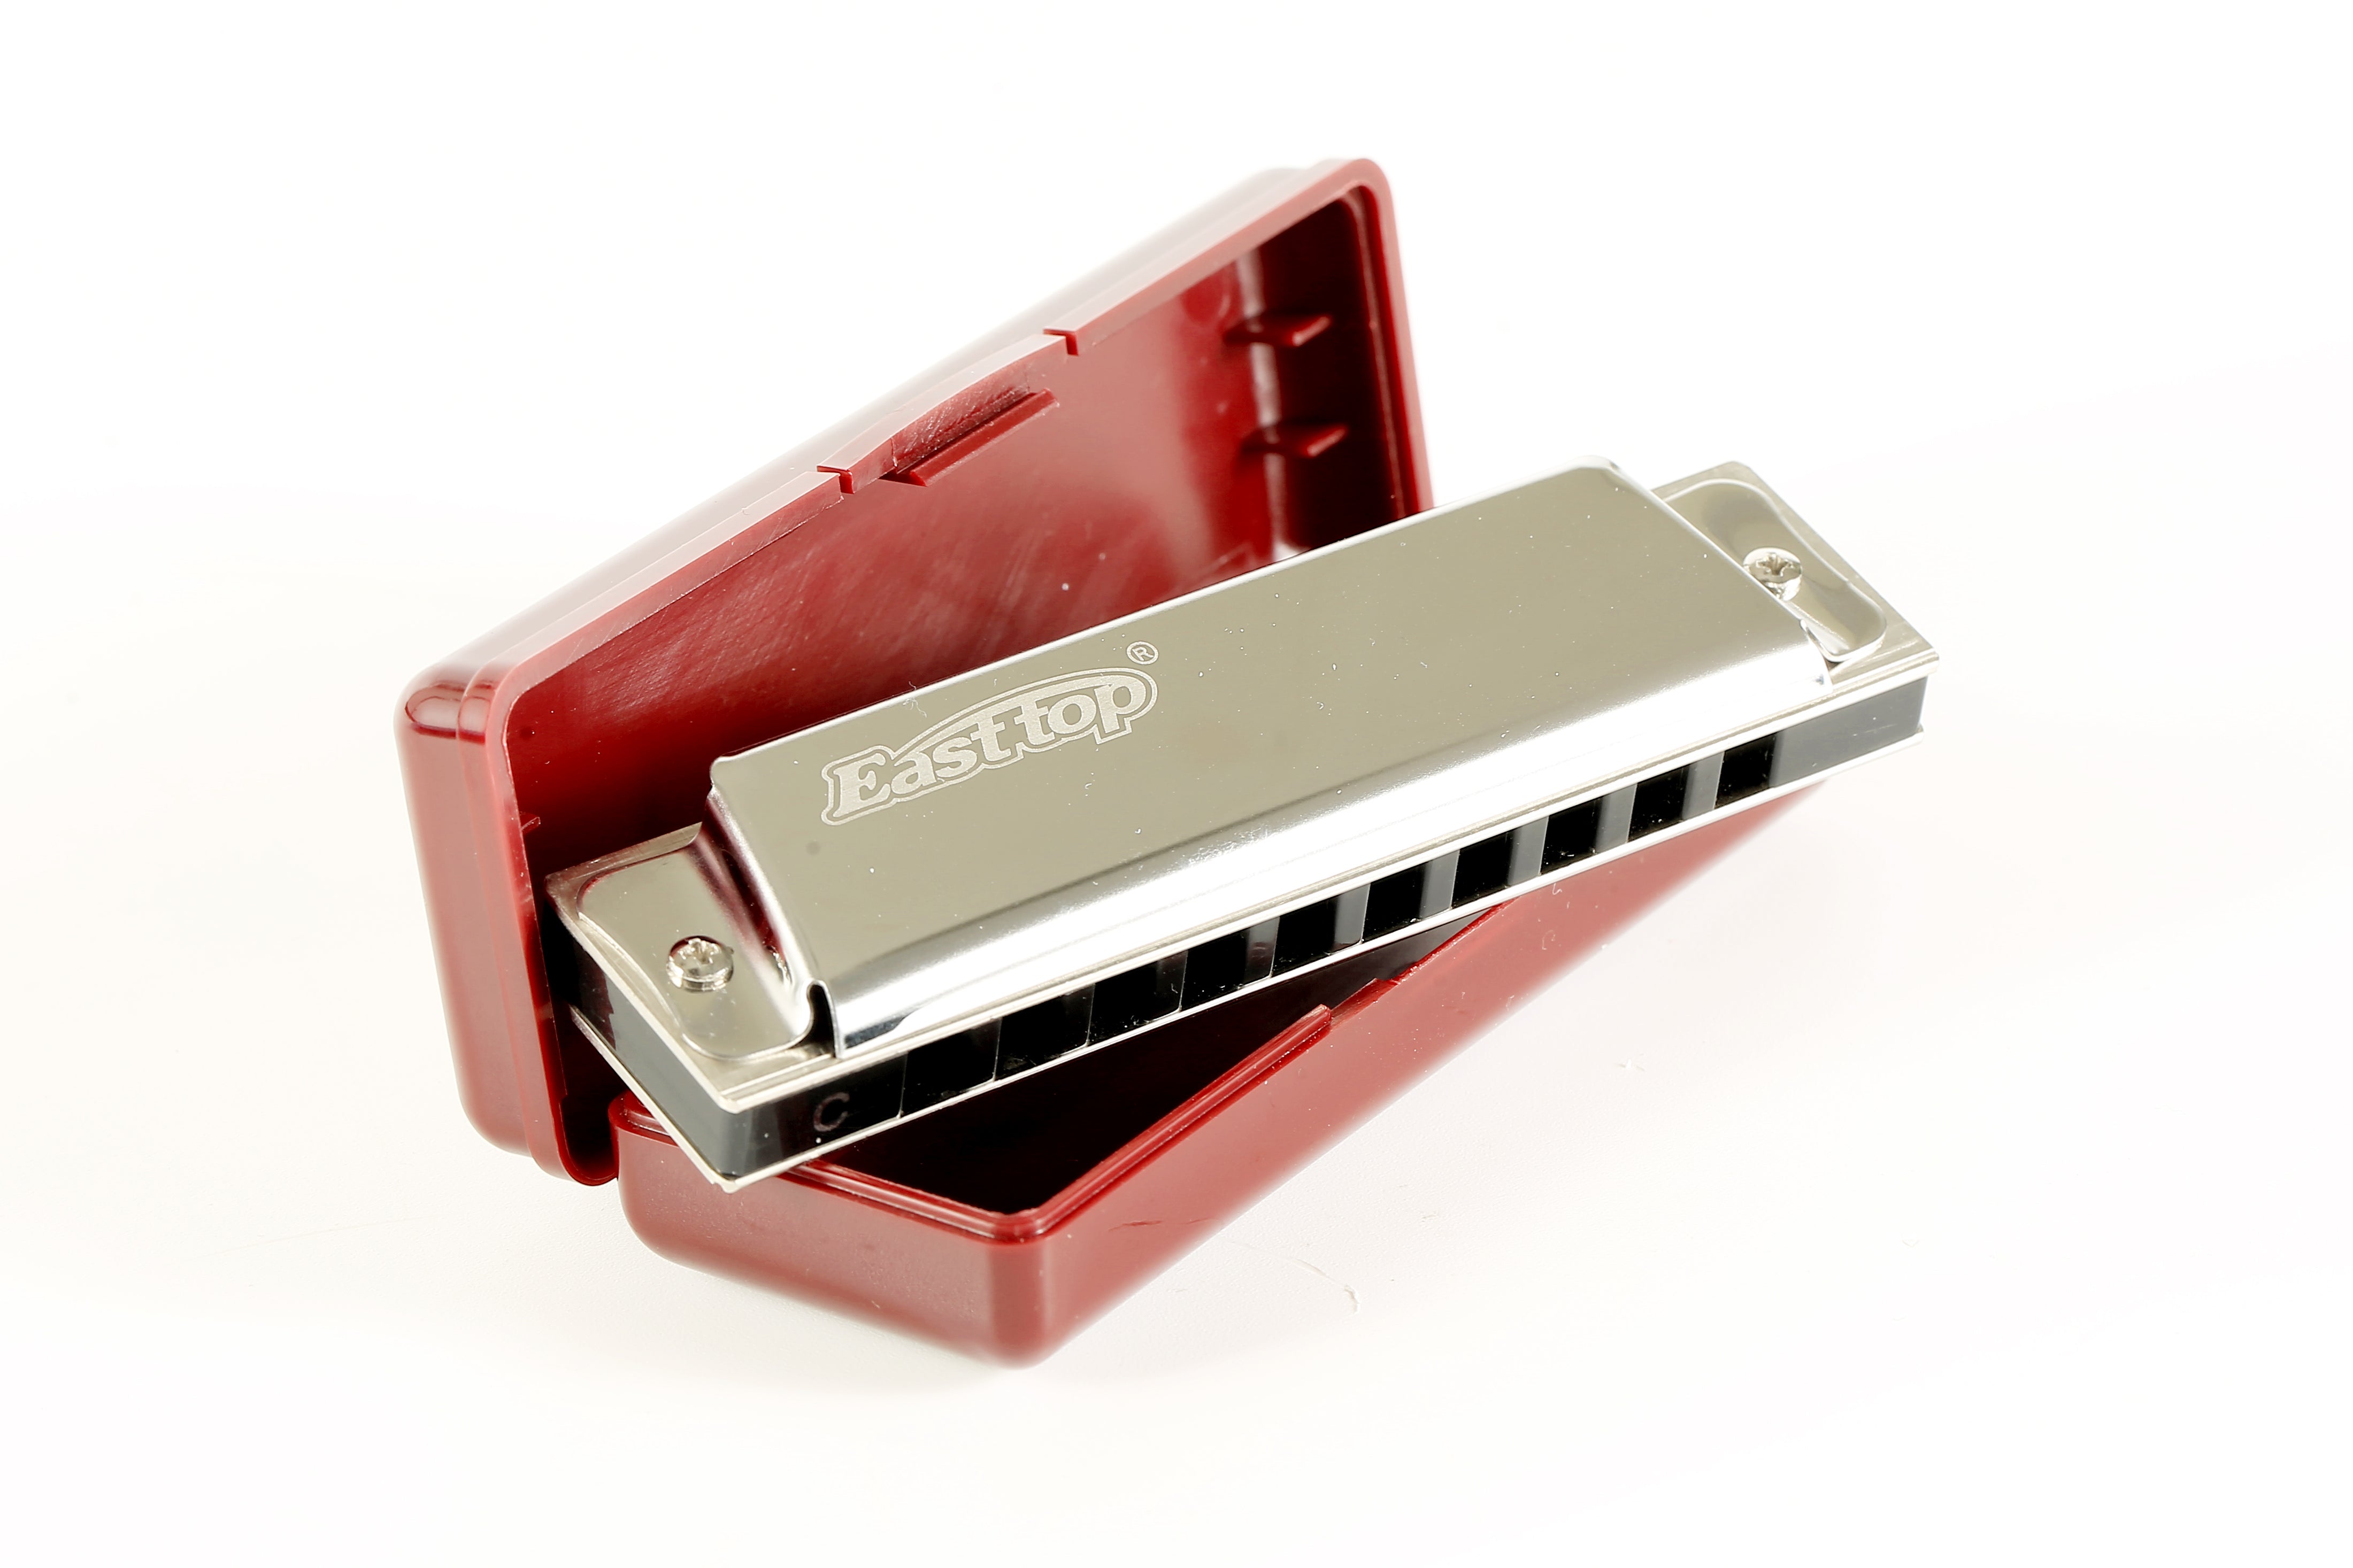 East top 10 Holes 20 Tones Blues C Diatonic Harmonica, Harmonica C For Adults, Beginners, Professional and Students - Easttop harmonica